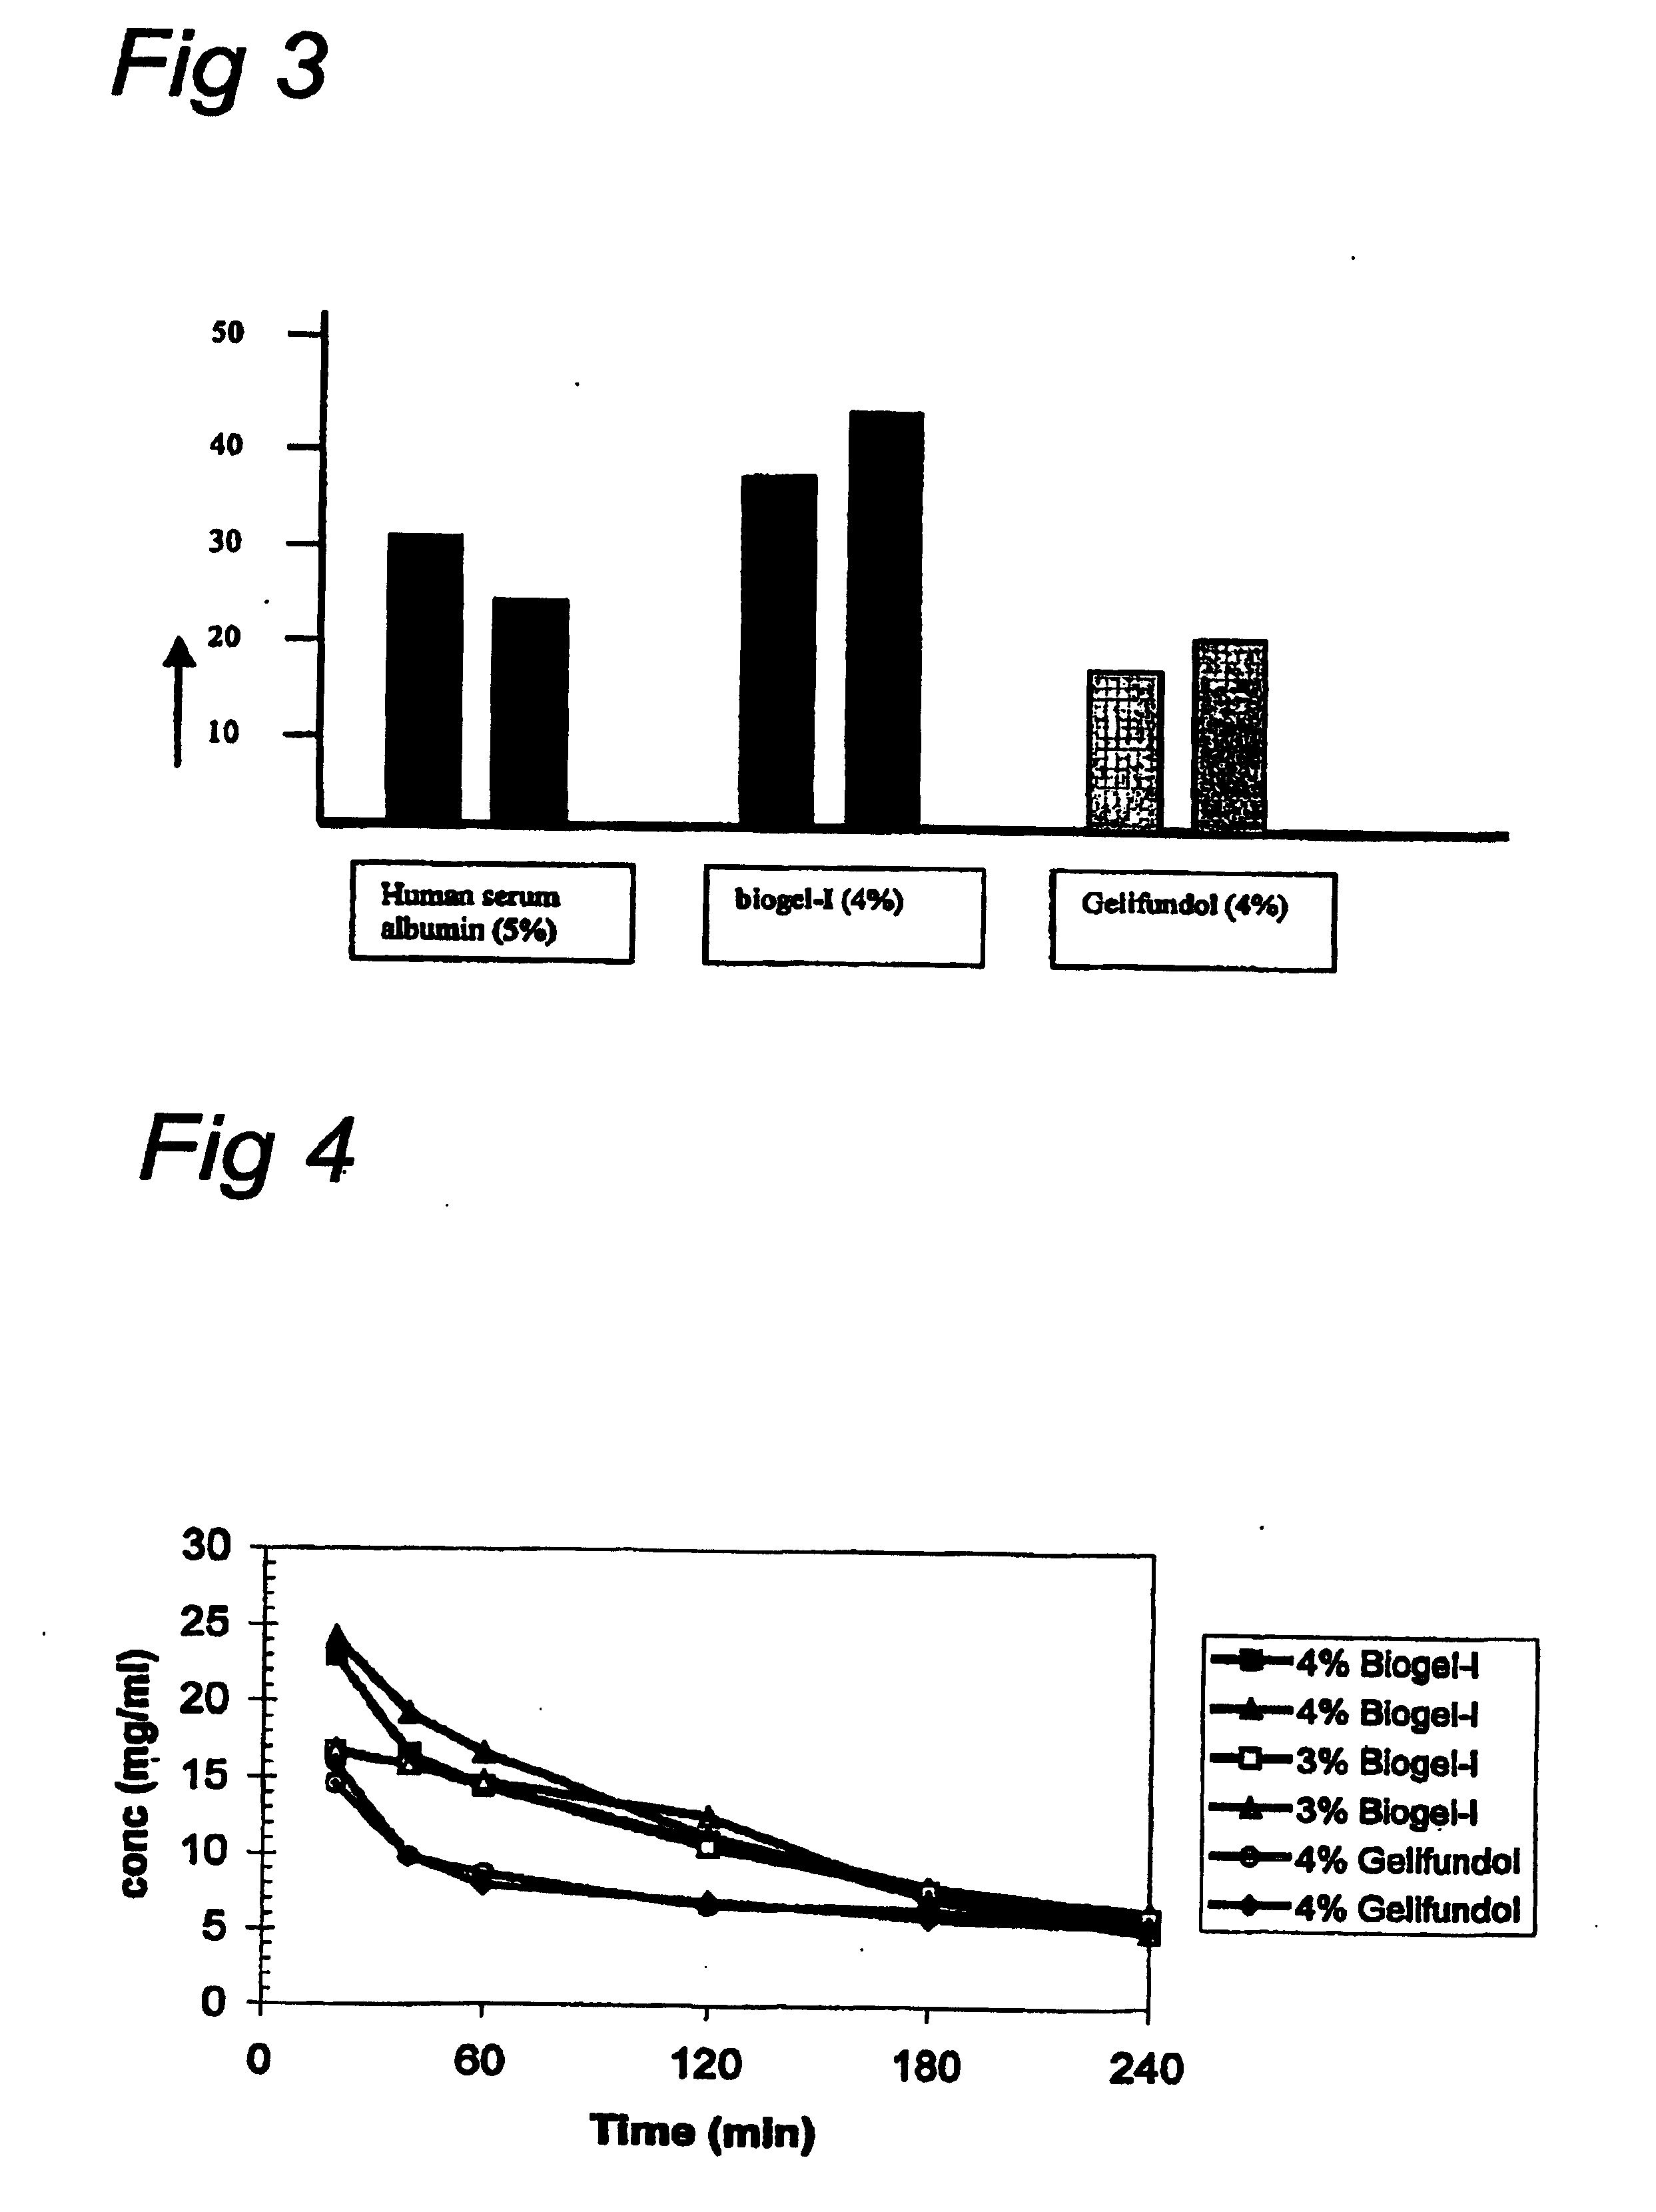 Recombinant gelatin-like proteins for use as plasma expanders